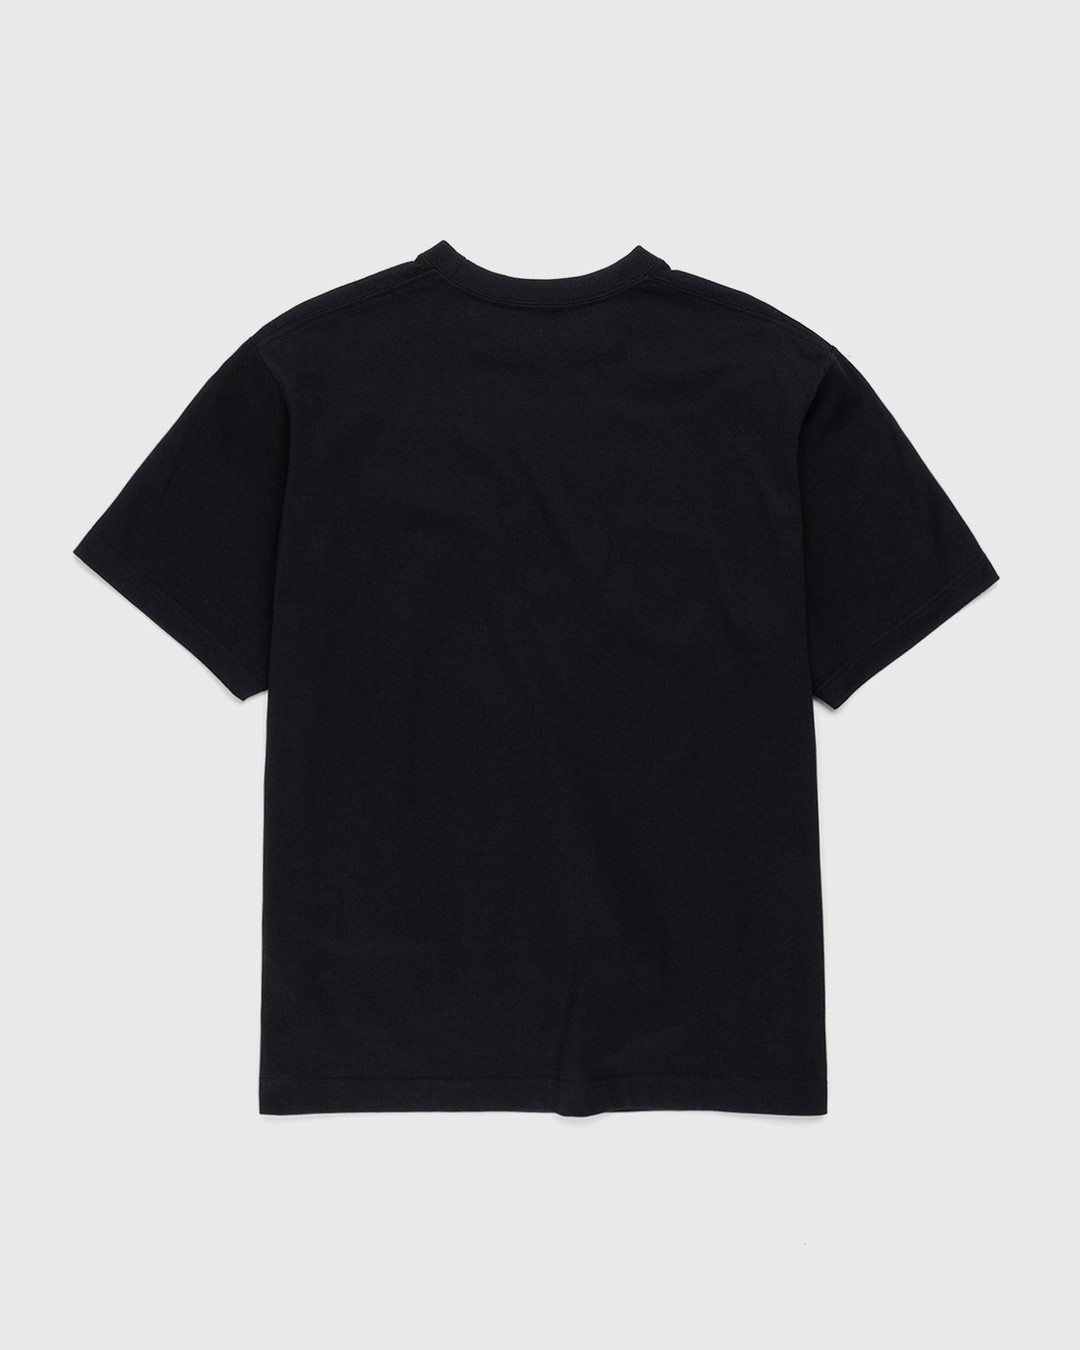 And Wander – Easy Hiking Dry T-Shirt Black - Tops - Black - Image 2